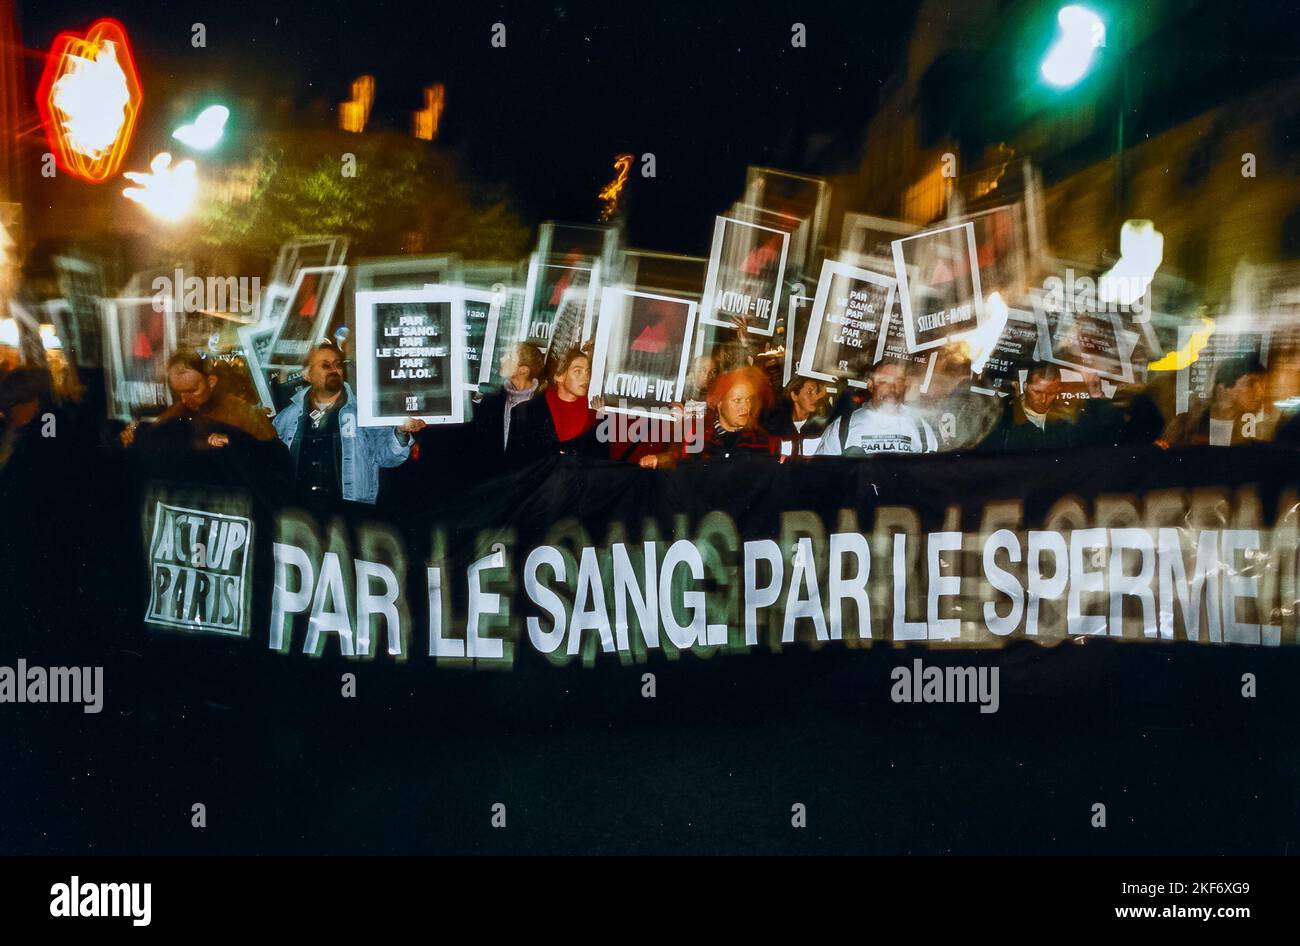 Parigi, Francia, folla Aids attivisti Marching with Protest Banner, Act Up Paris ONG World AIDS Day, dicembre 1, slogan 'by the Blood, by the sperm, by the Law' Foto Stock